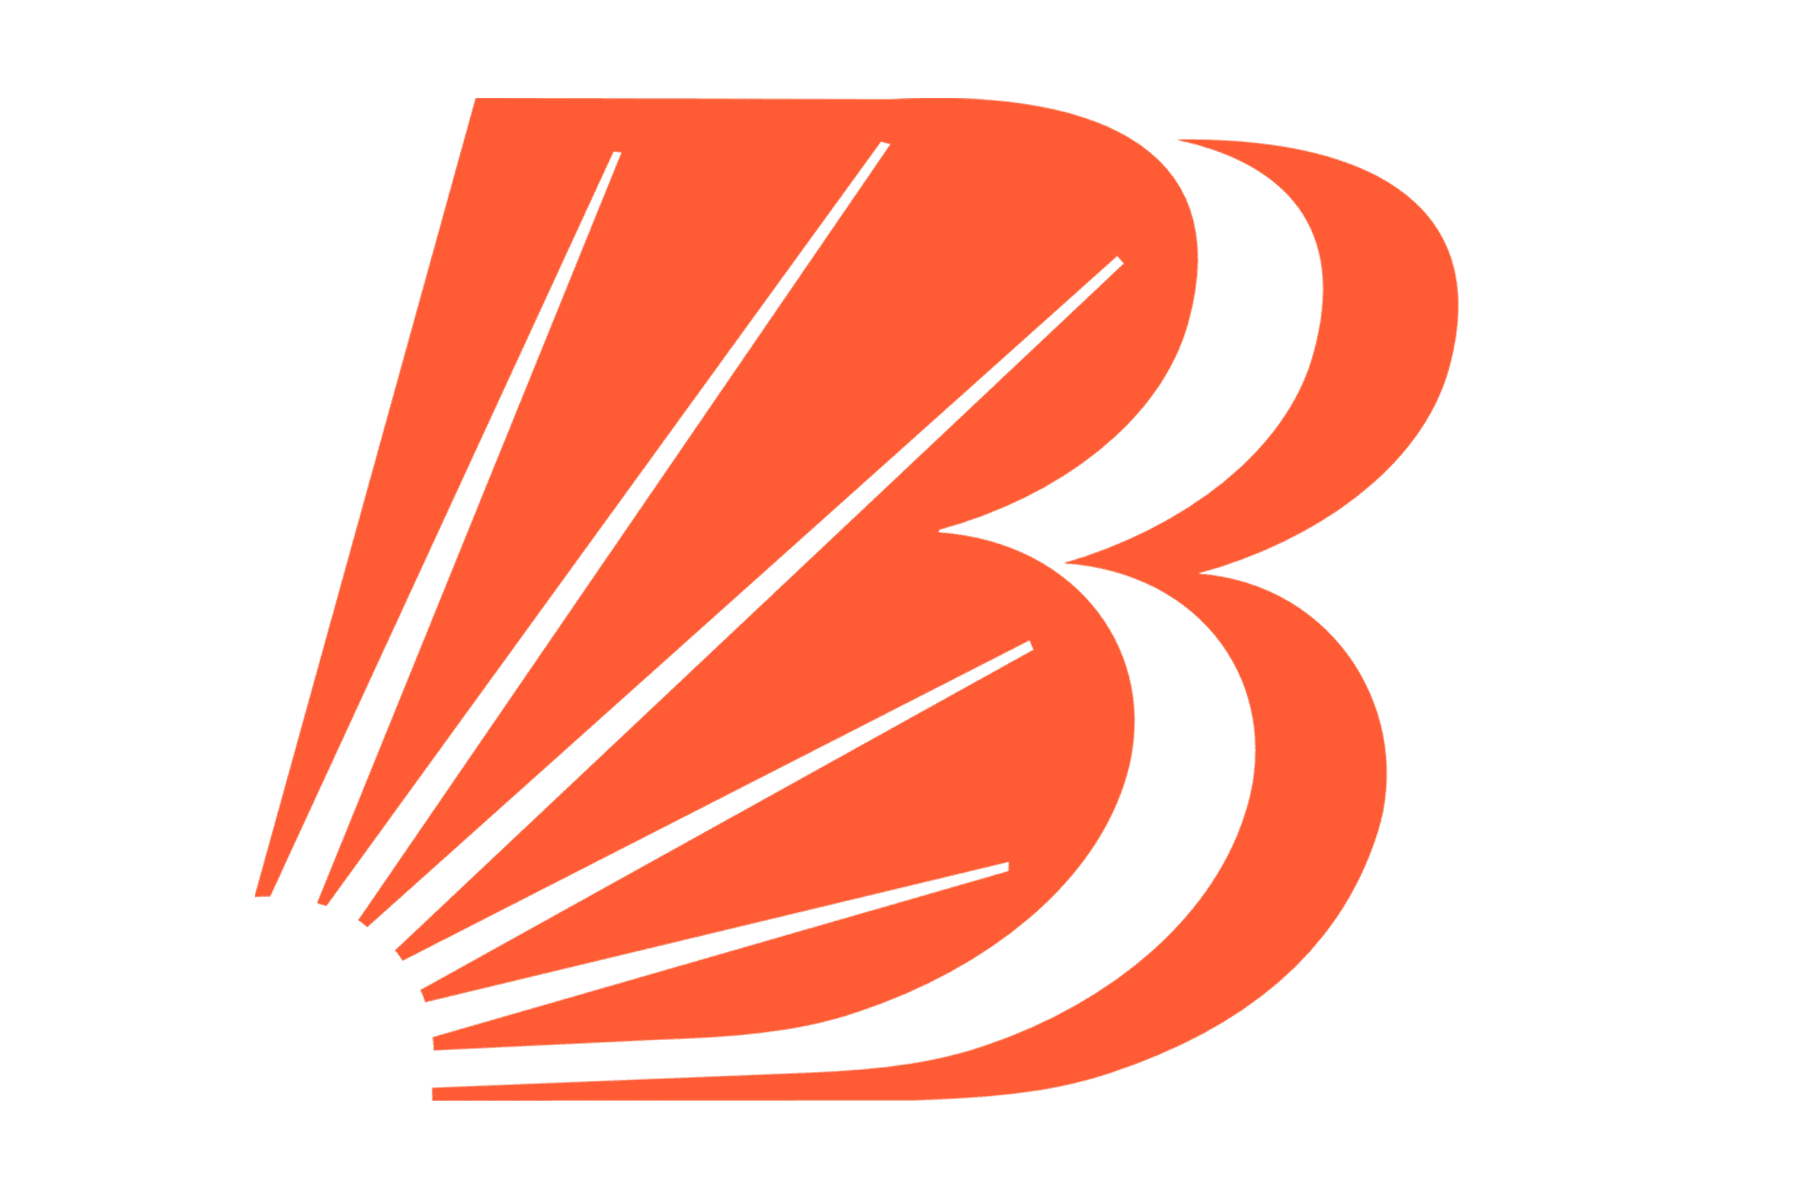 Bank of Baroda - Ab Pension par full attention. Submit... | Facebook